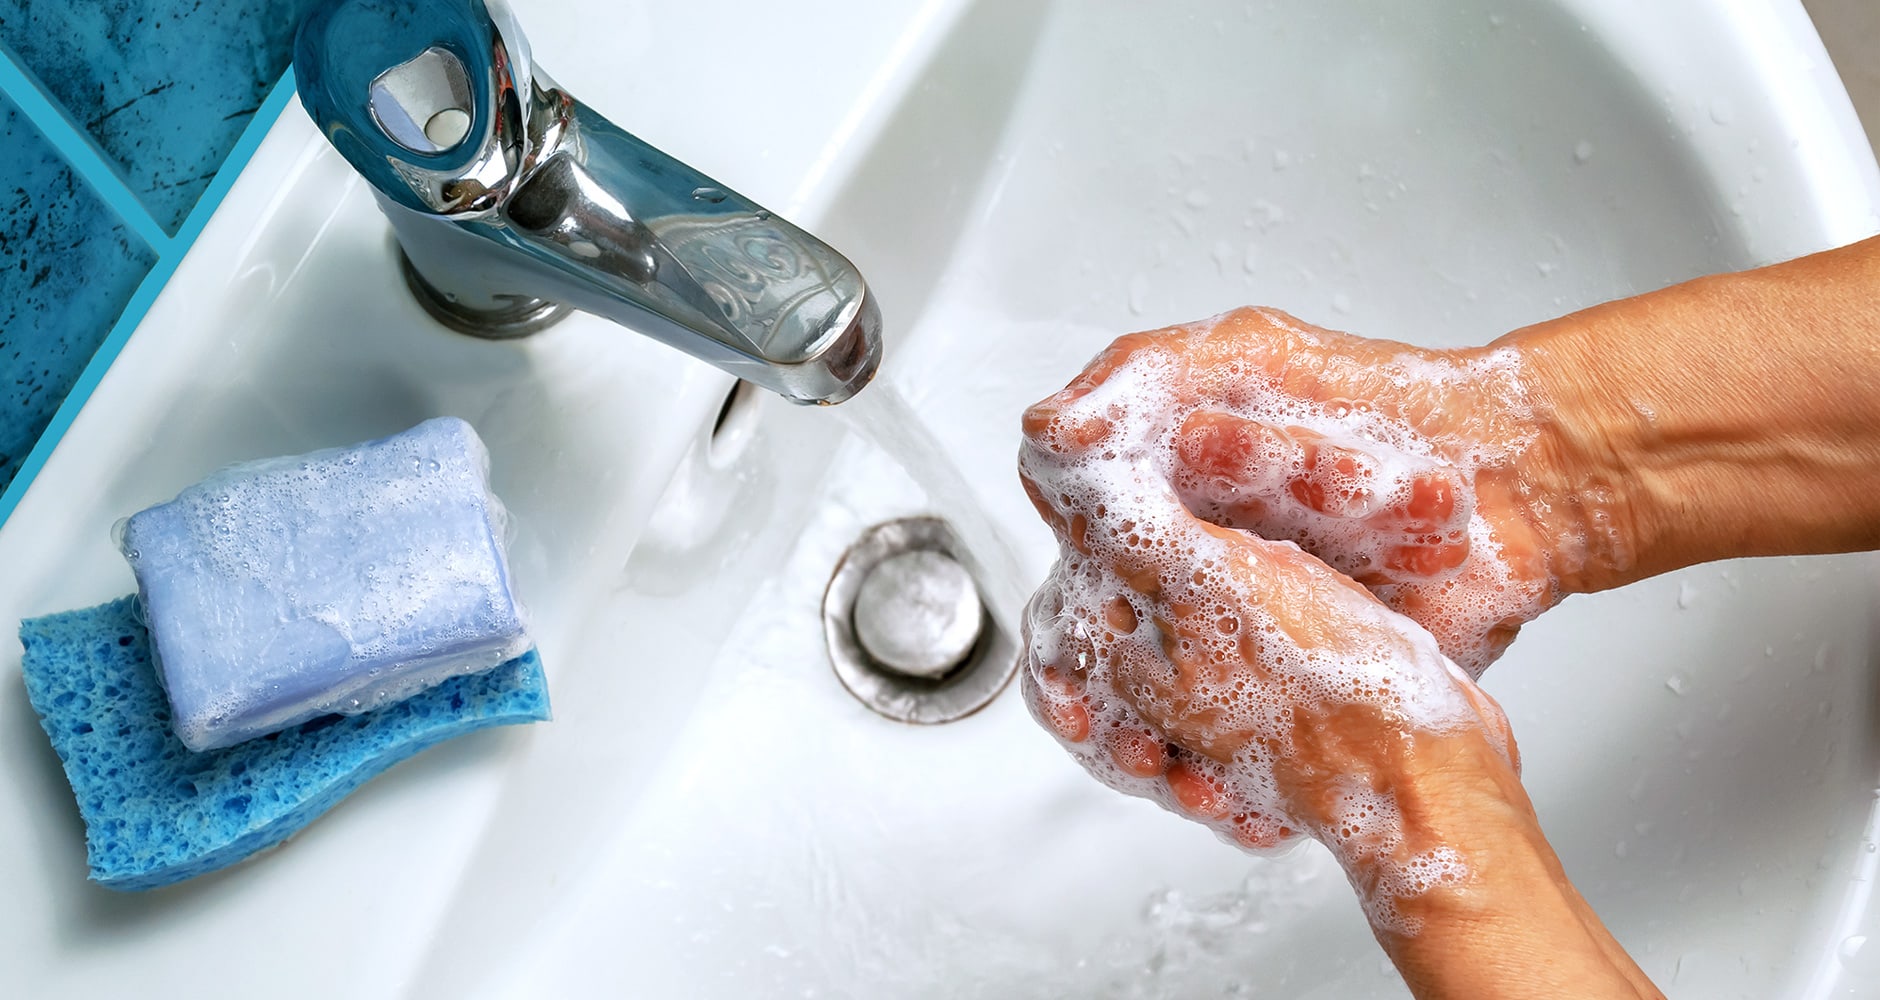 washing hands over sink with blue sponges next to faucet